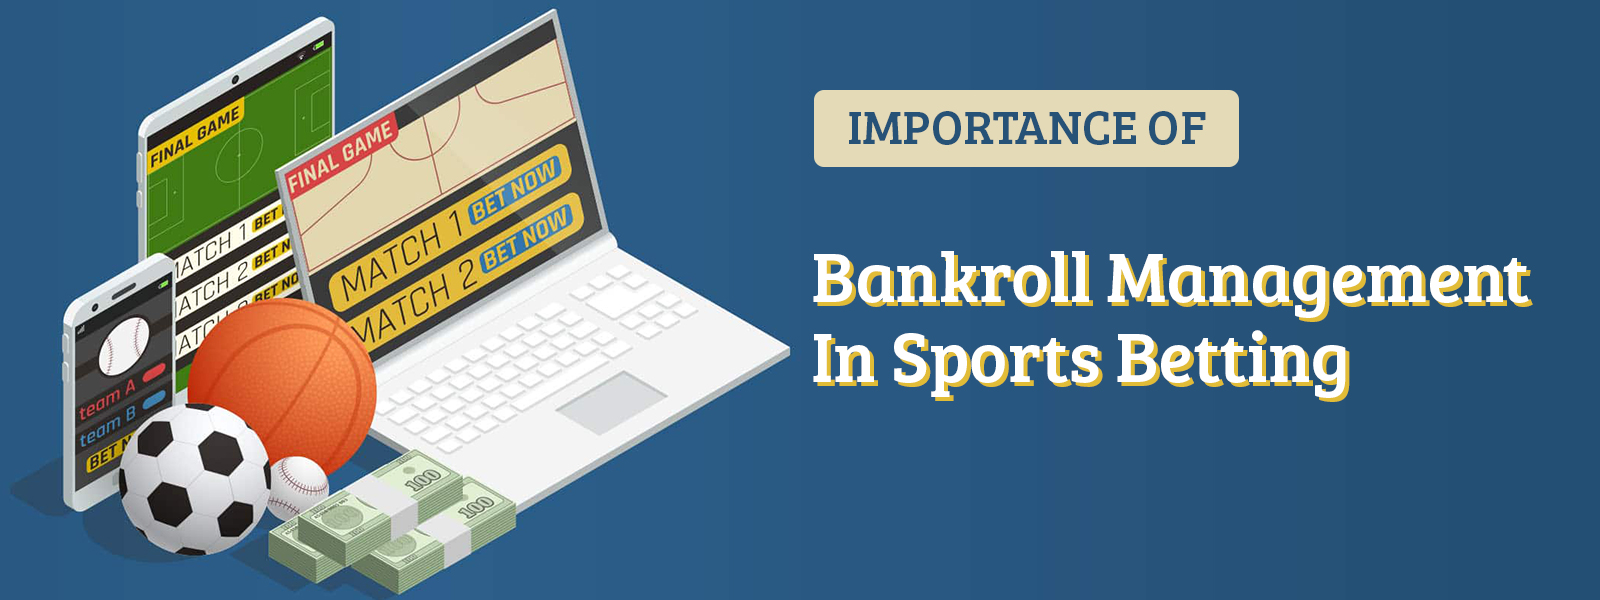 Importance Of Bankroll Management In Sports Betting